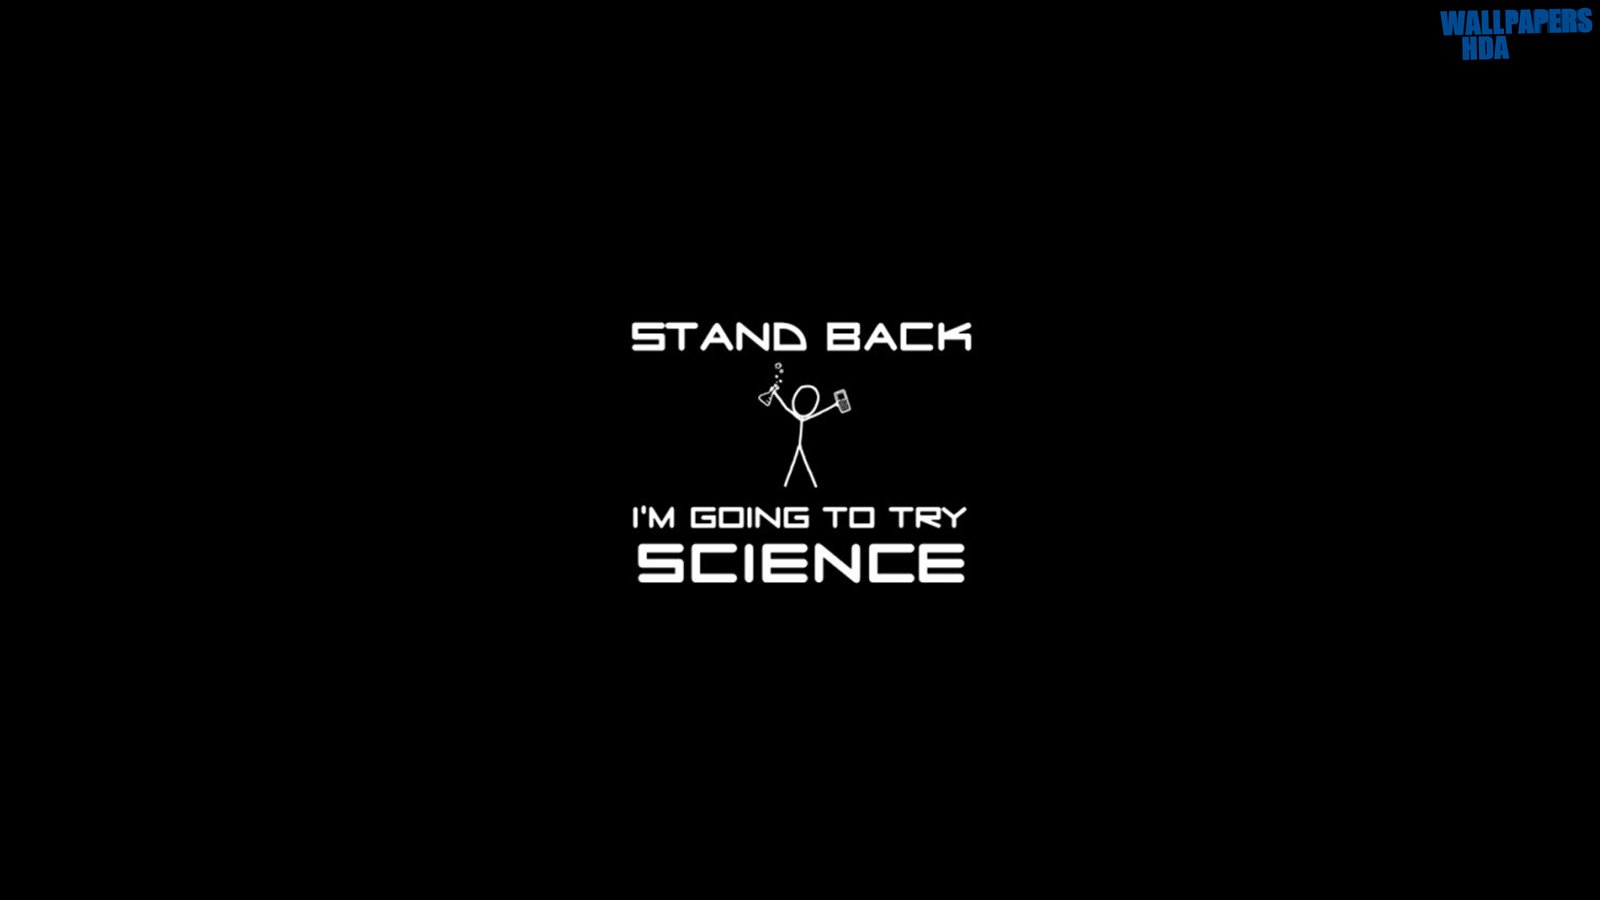 Stand back wallpaper 1600x900